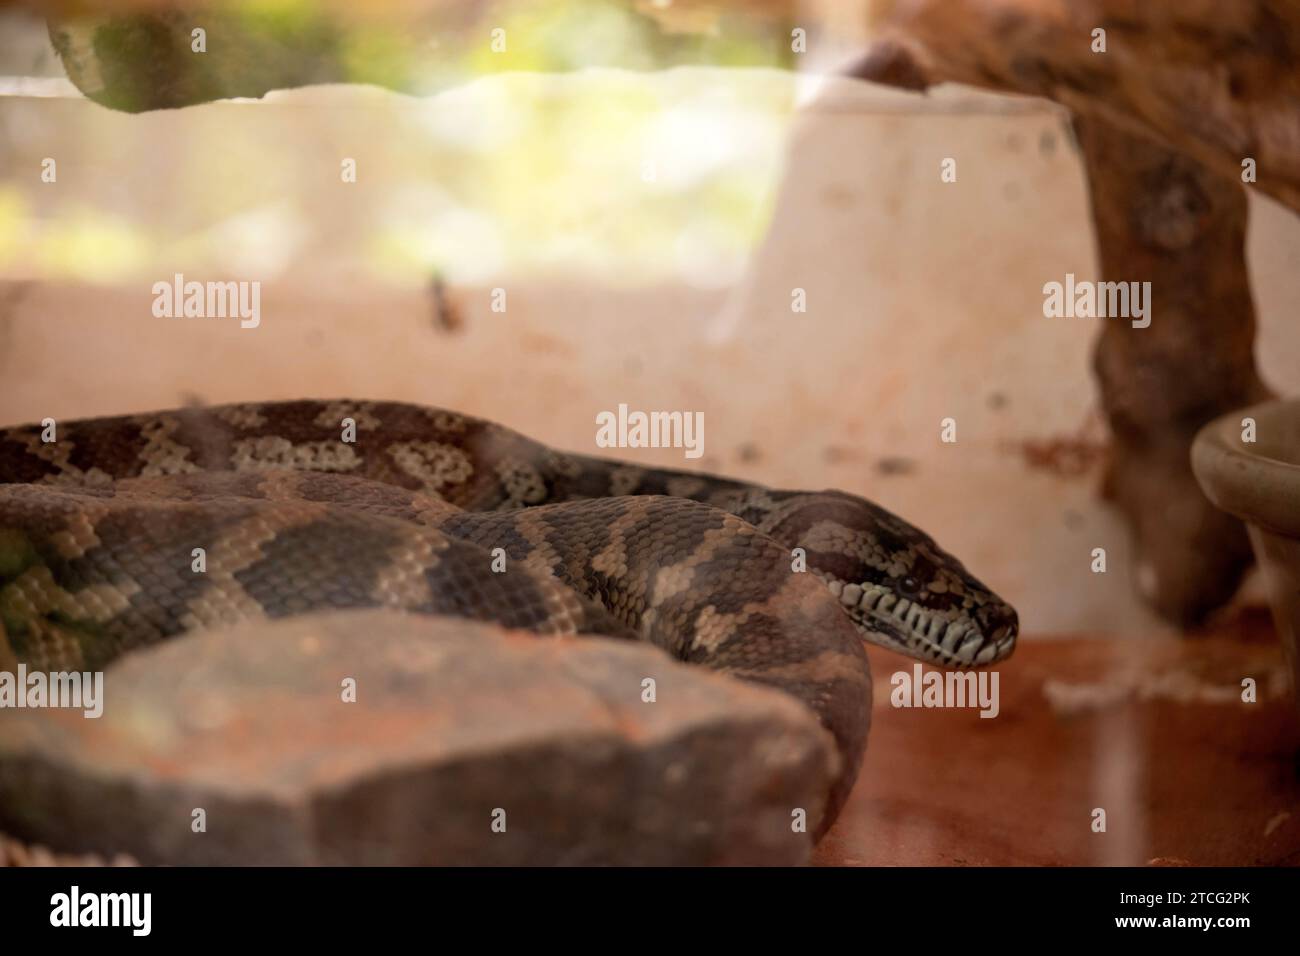 the carpet python well camouflaged with olive to brown skin with cream blotches which allows them to hide among leaf litter in tree hollows, logs and Stock Photo